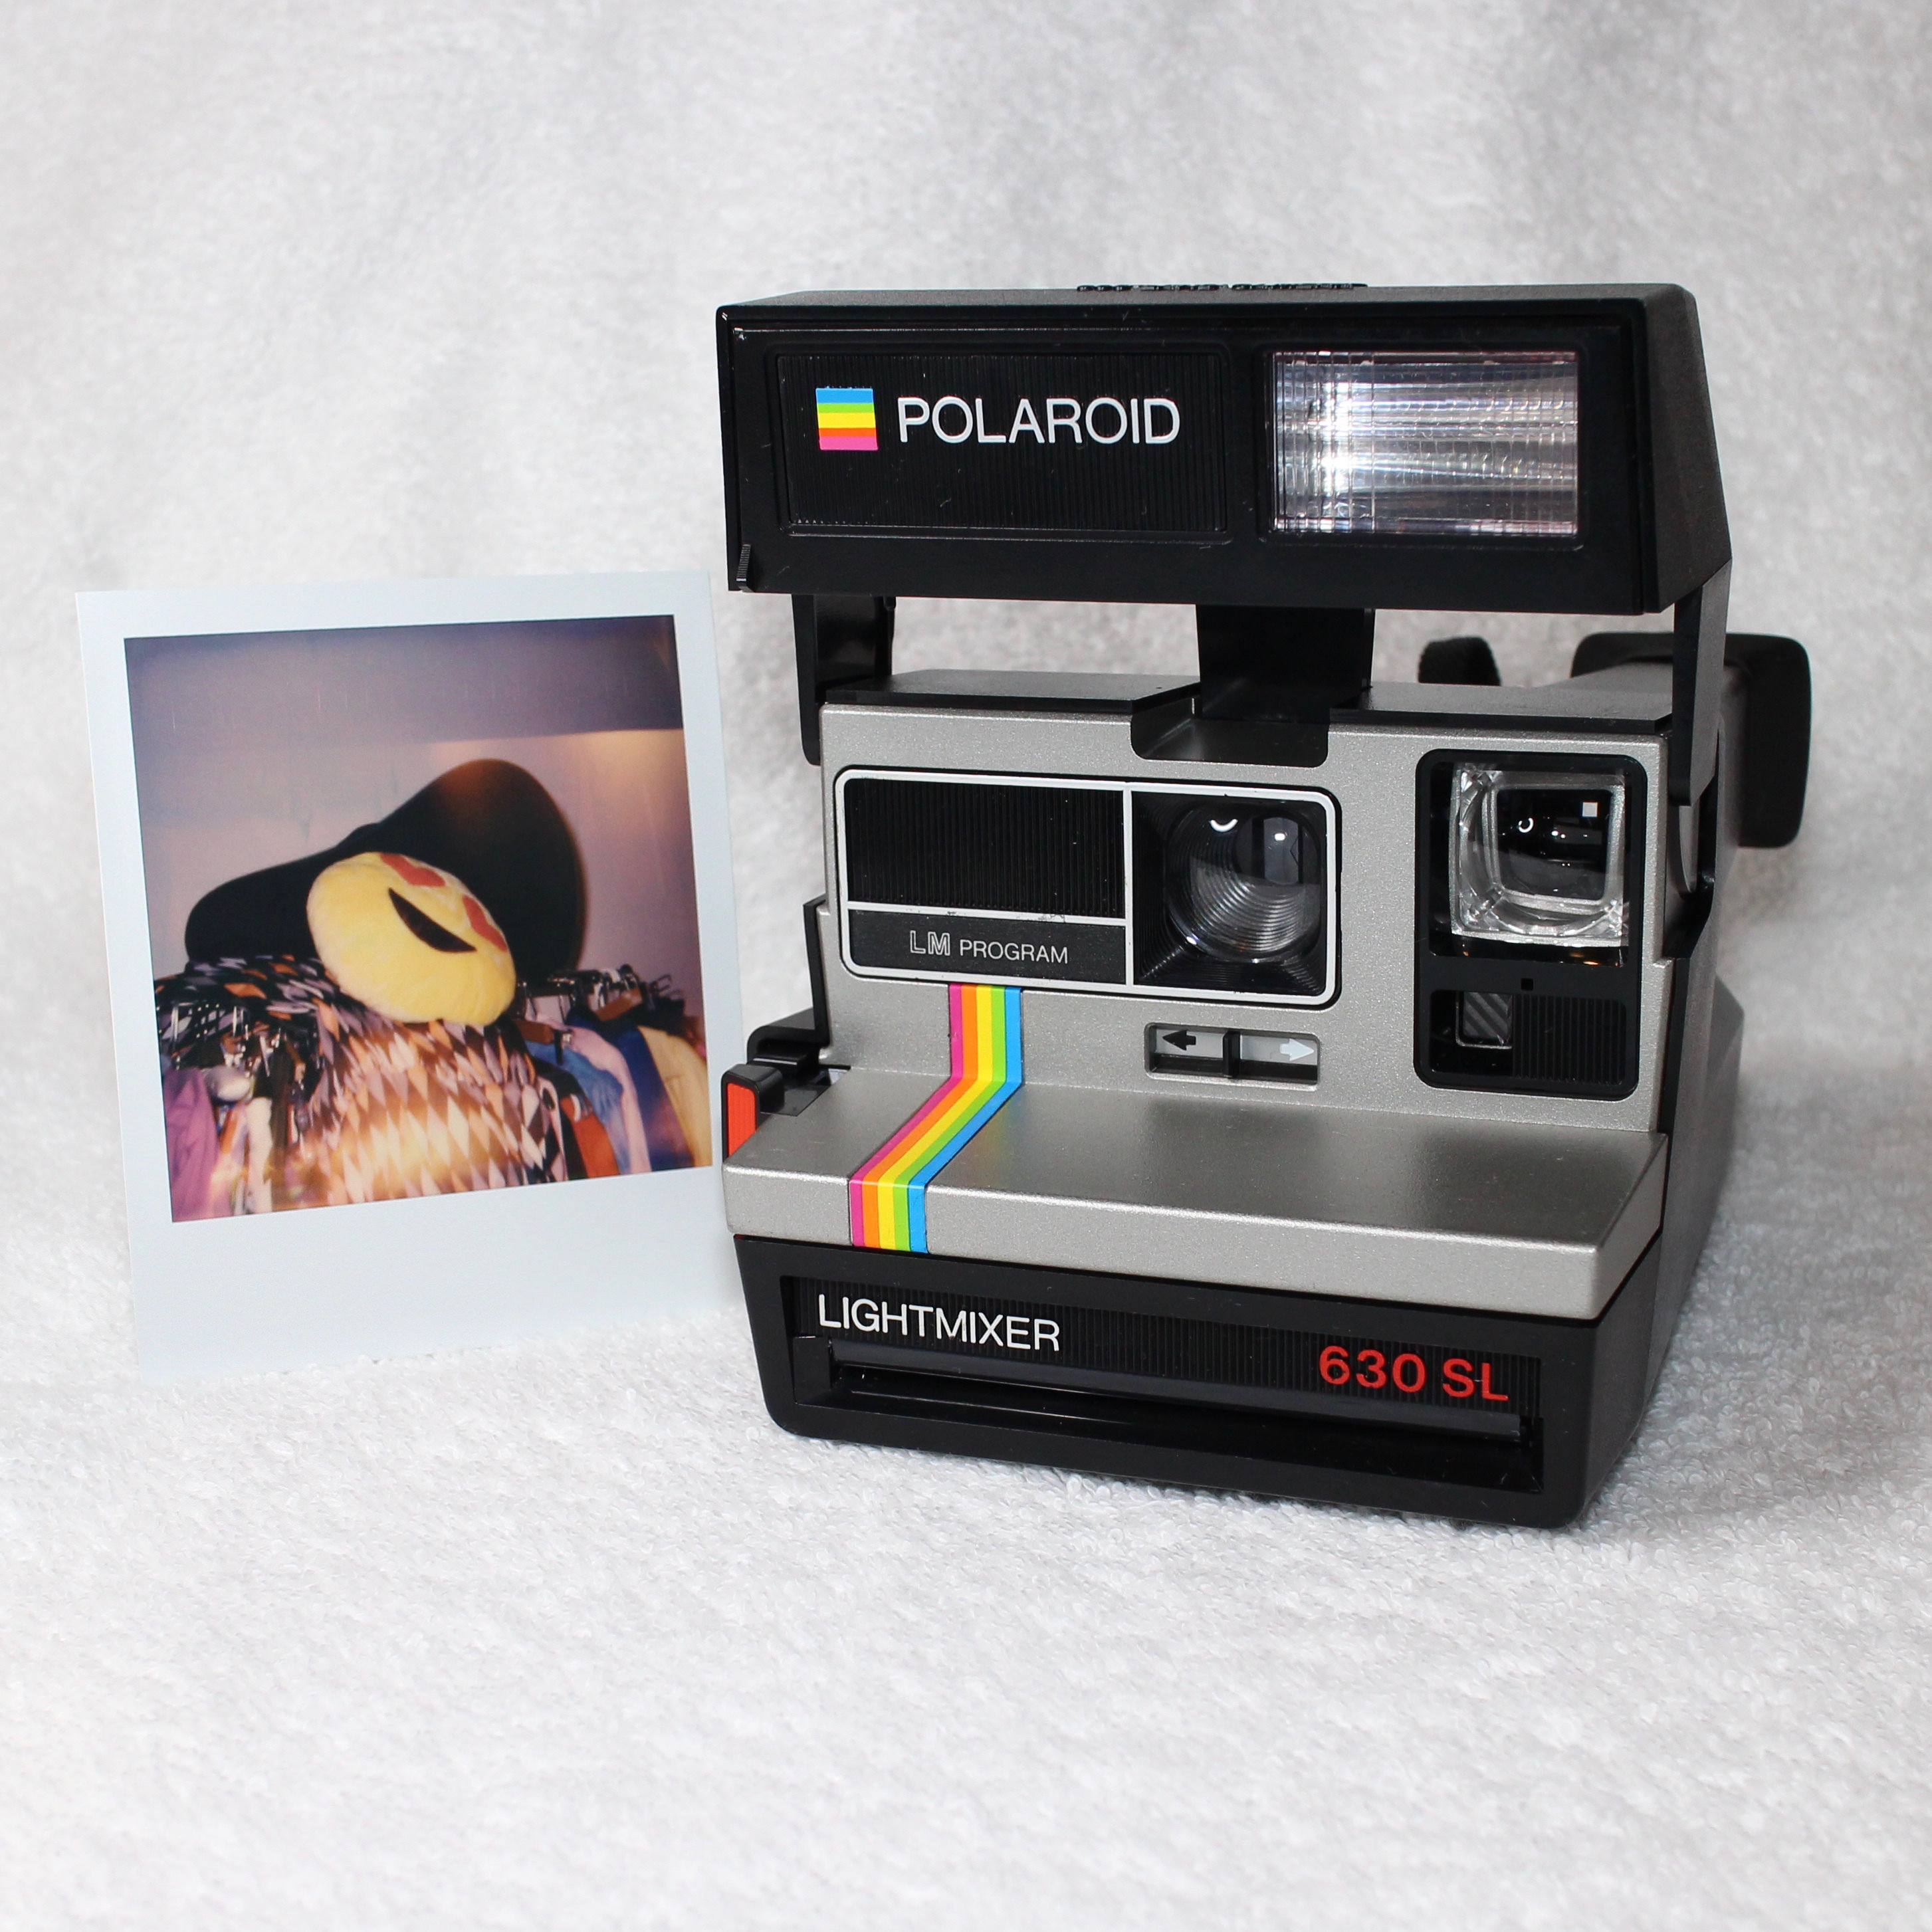 Original Silver with Rainbow Polaroid Lightmixer 630SL - Works Great,  Tested and Cleaned